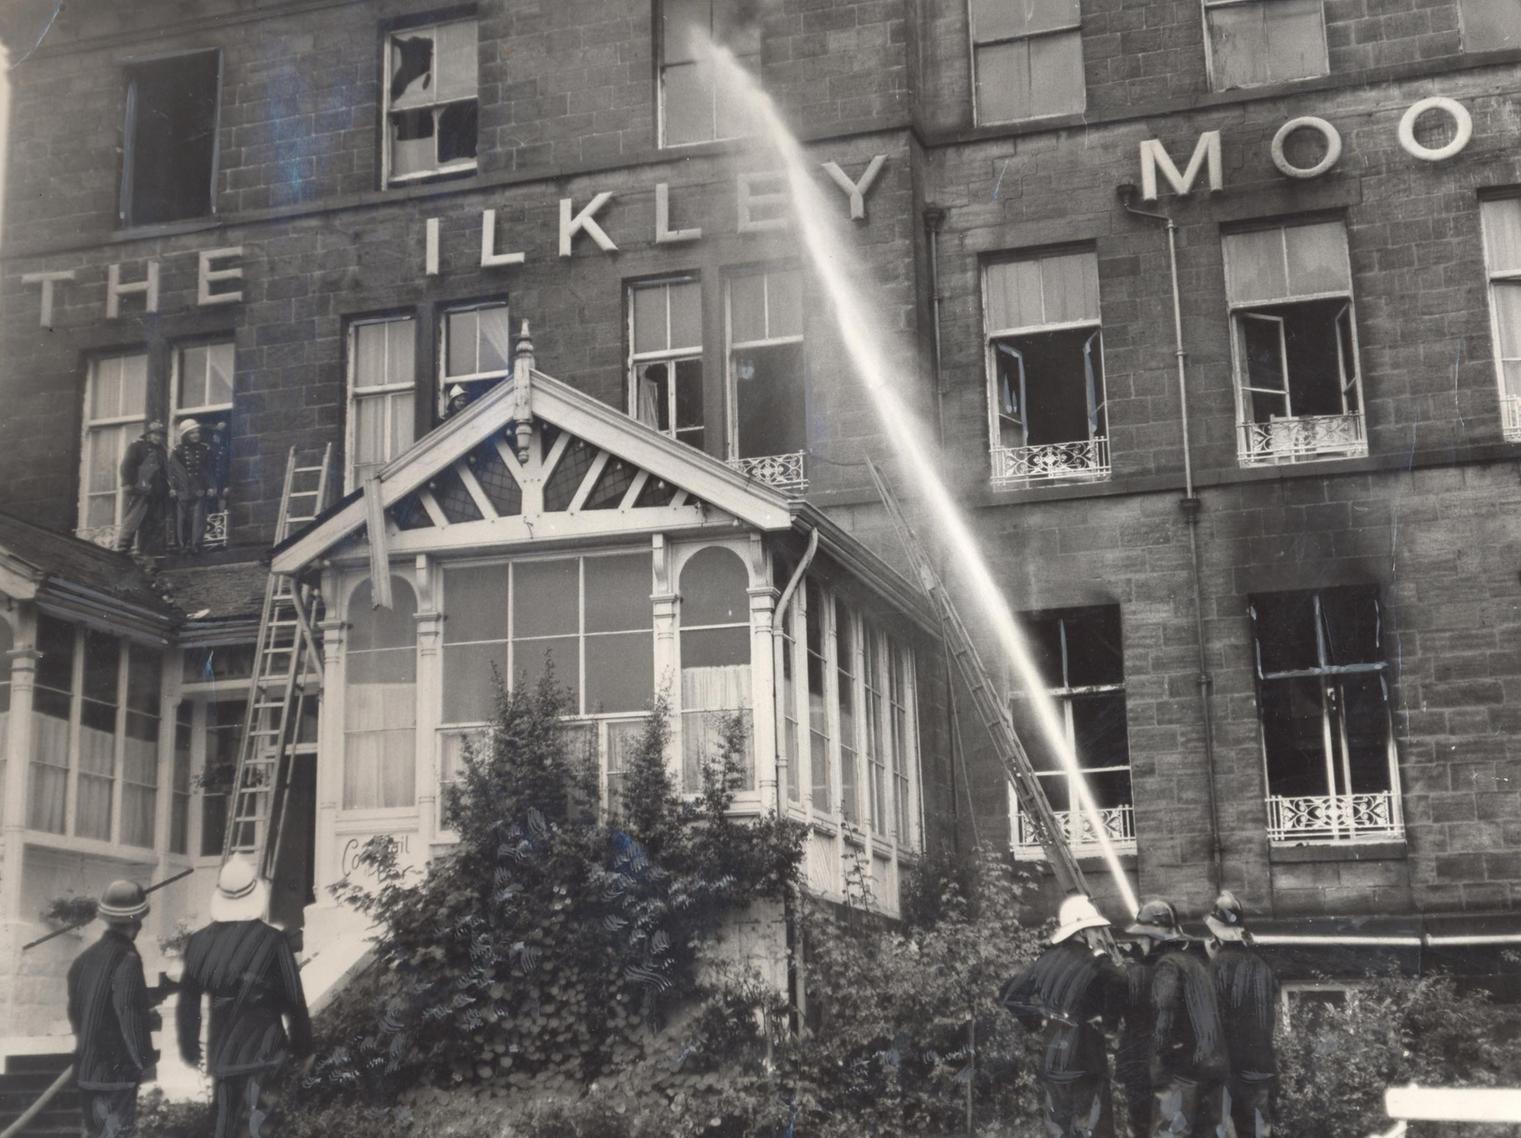 Firefighters fighting a blaze at the Ilkley Moor Hotel.